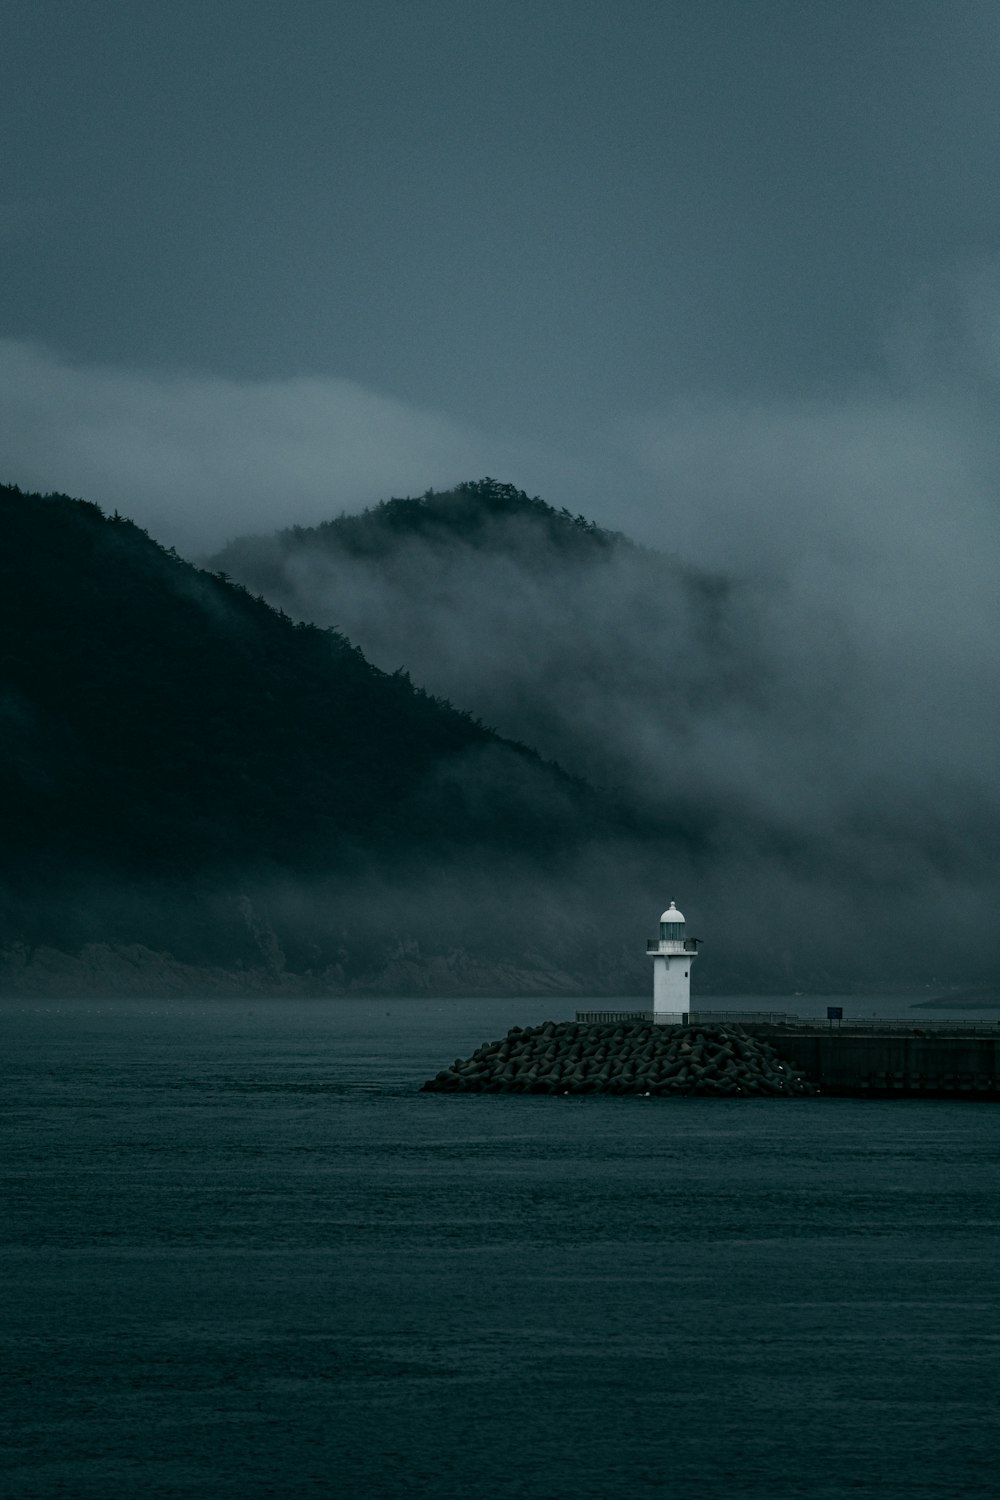 a lighthouse in the middle of a body of water